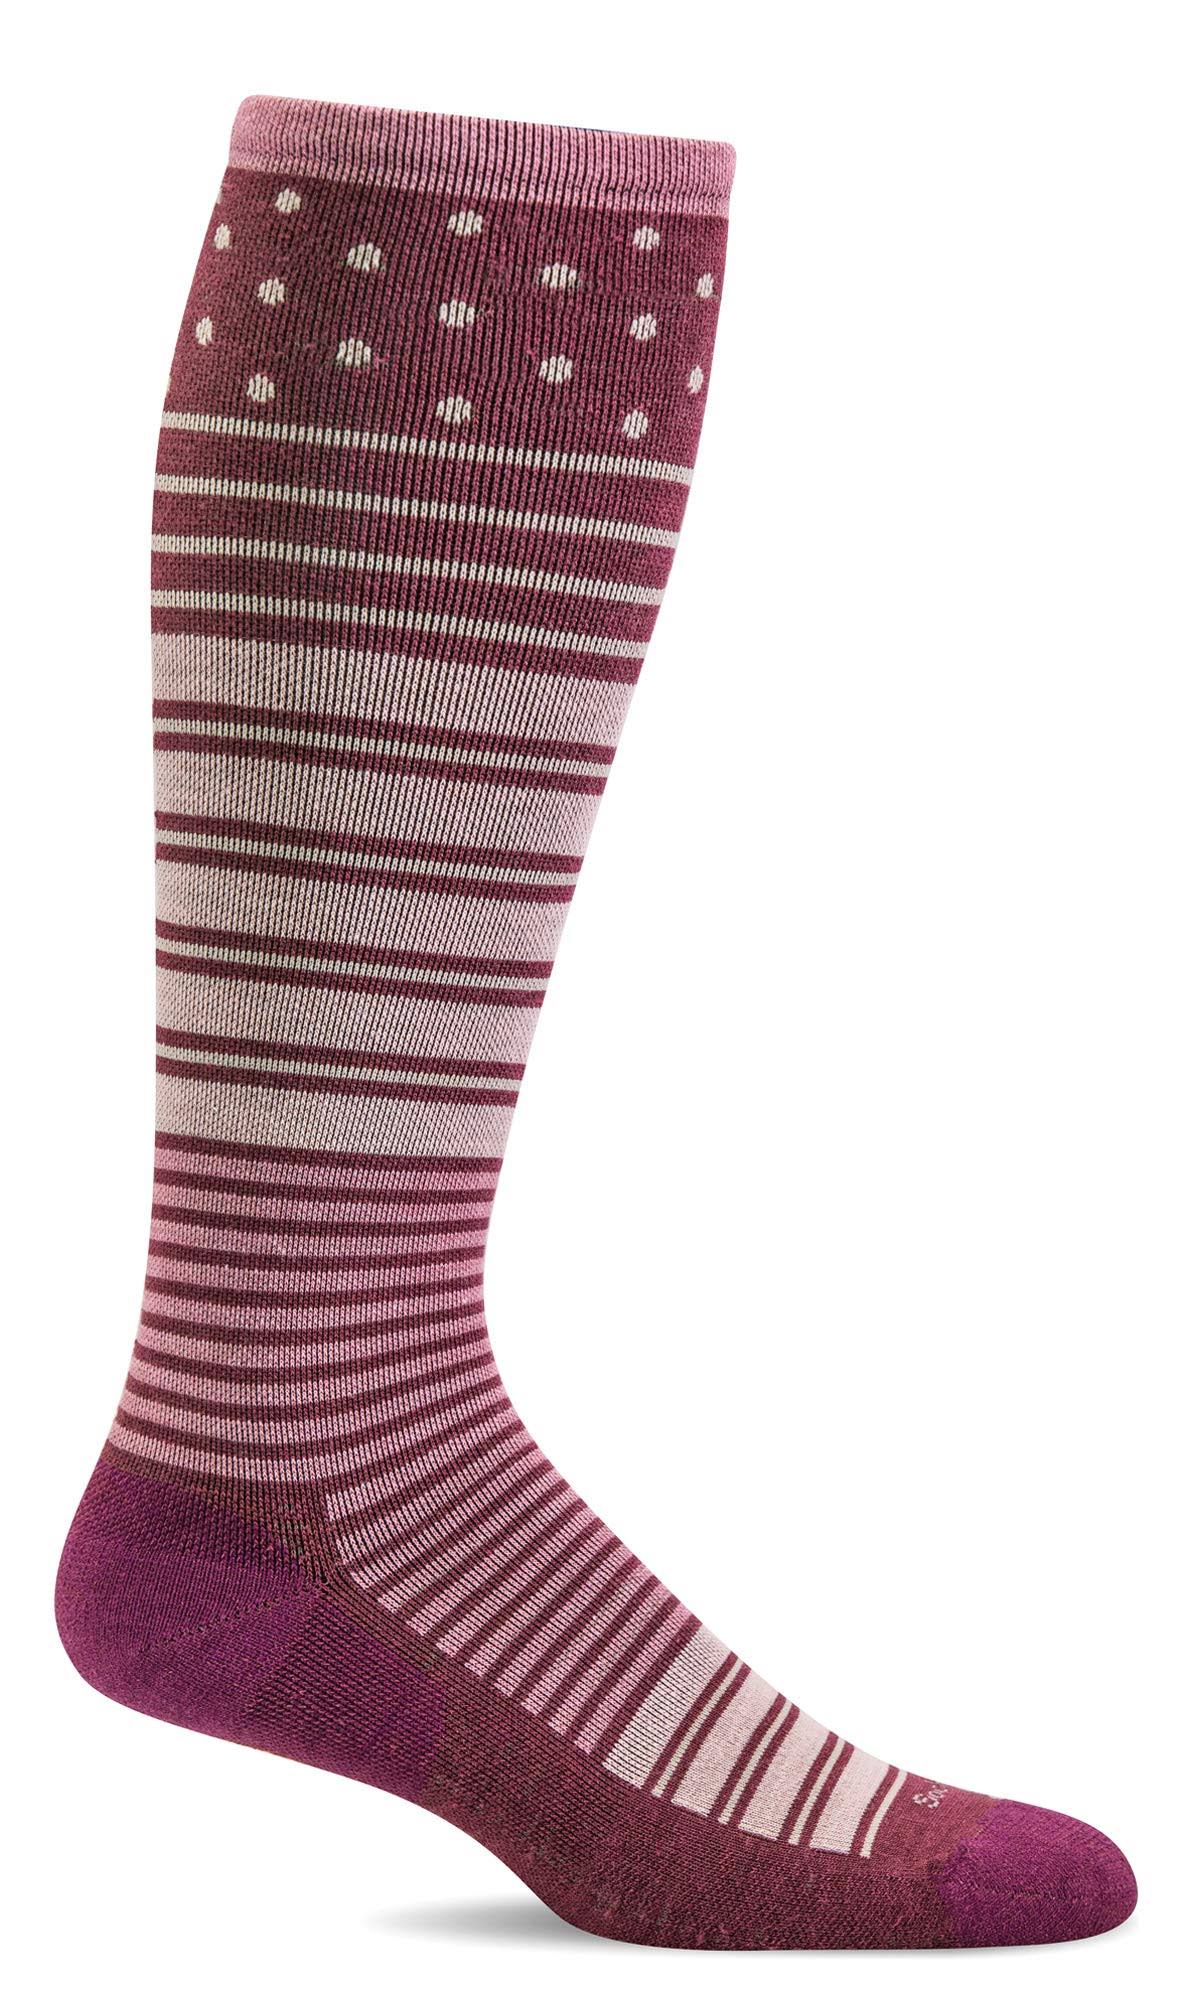 Sockwell Women's Twister Firm Compression Socks S/M / Mulberry